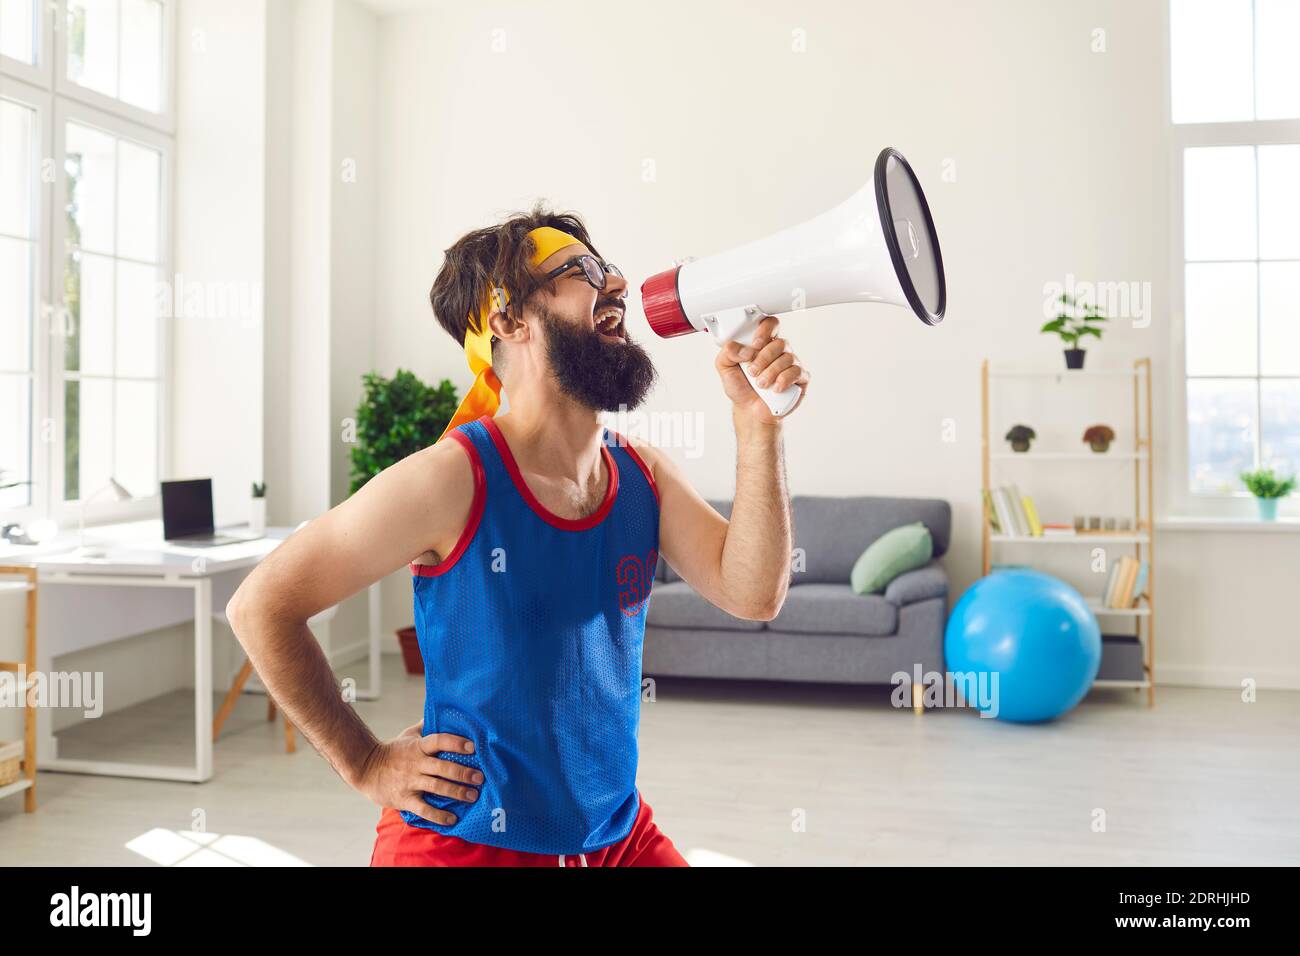 Sports fan cheering in megaphone, supporting favorite team or announcing fitness goods sale Stock Photo